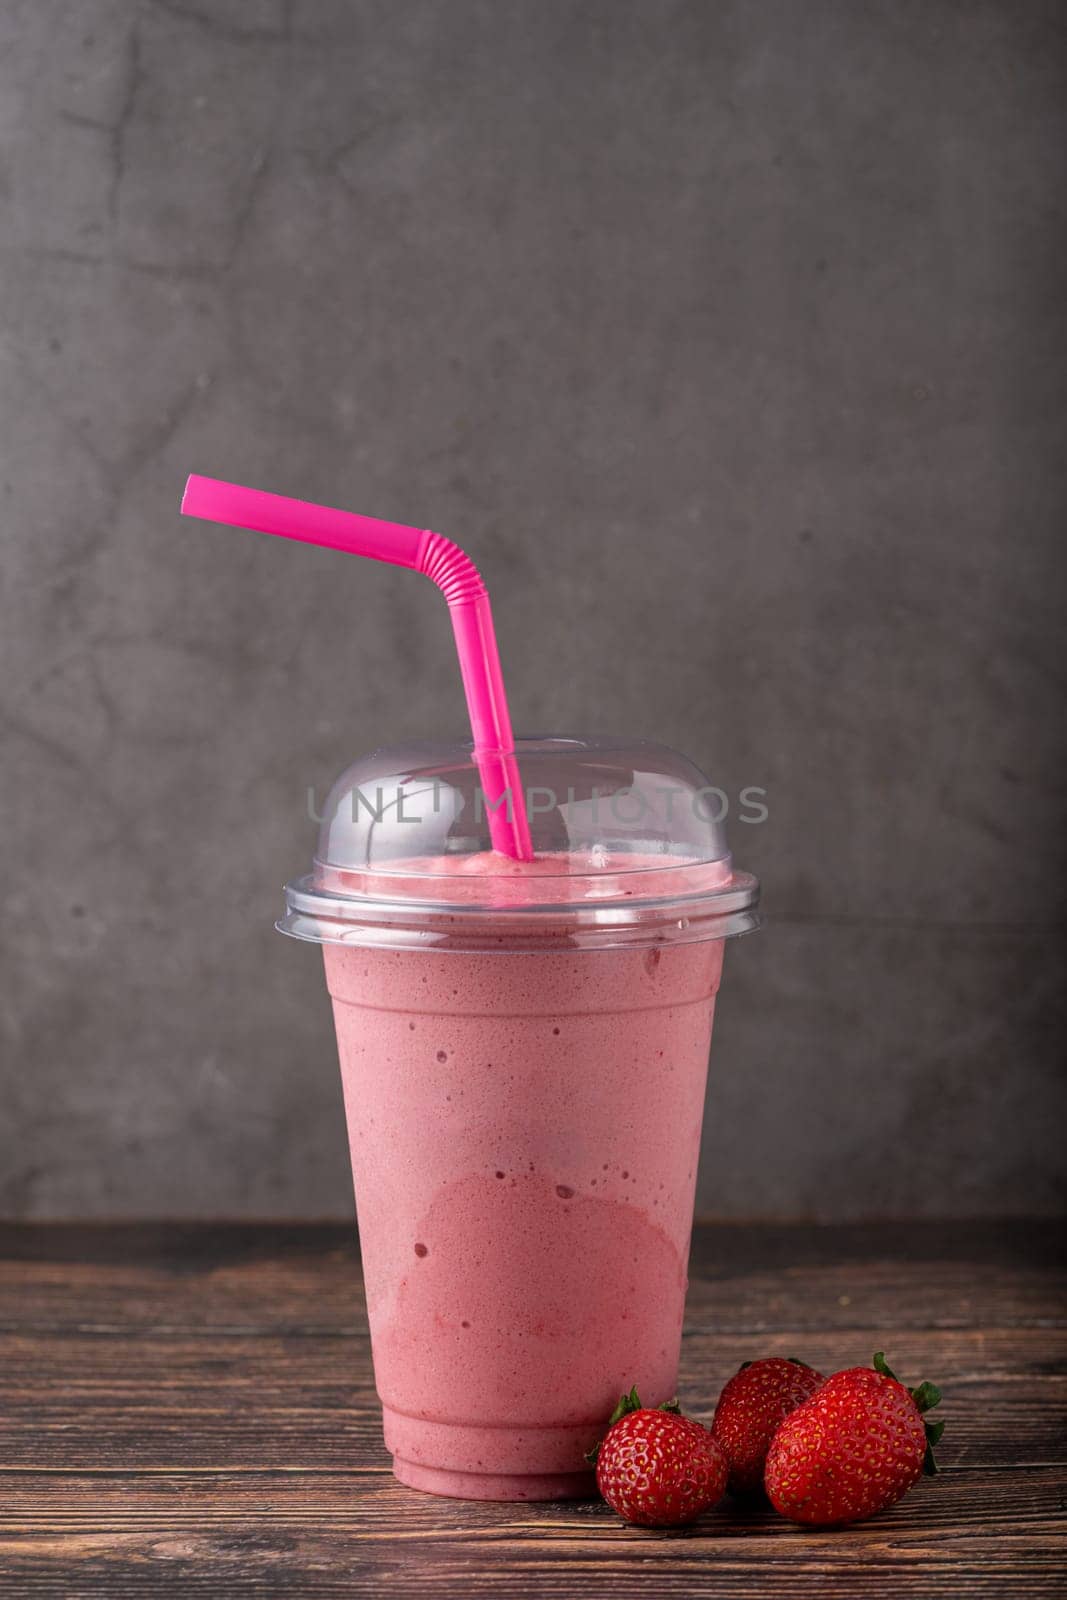 Strawberry smoothie or milkshake, healthy food for breakfast and snack by Sonat